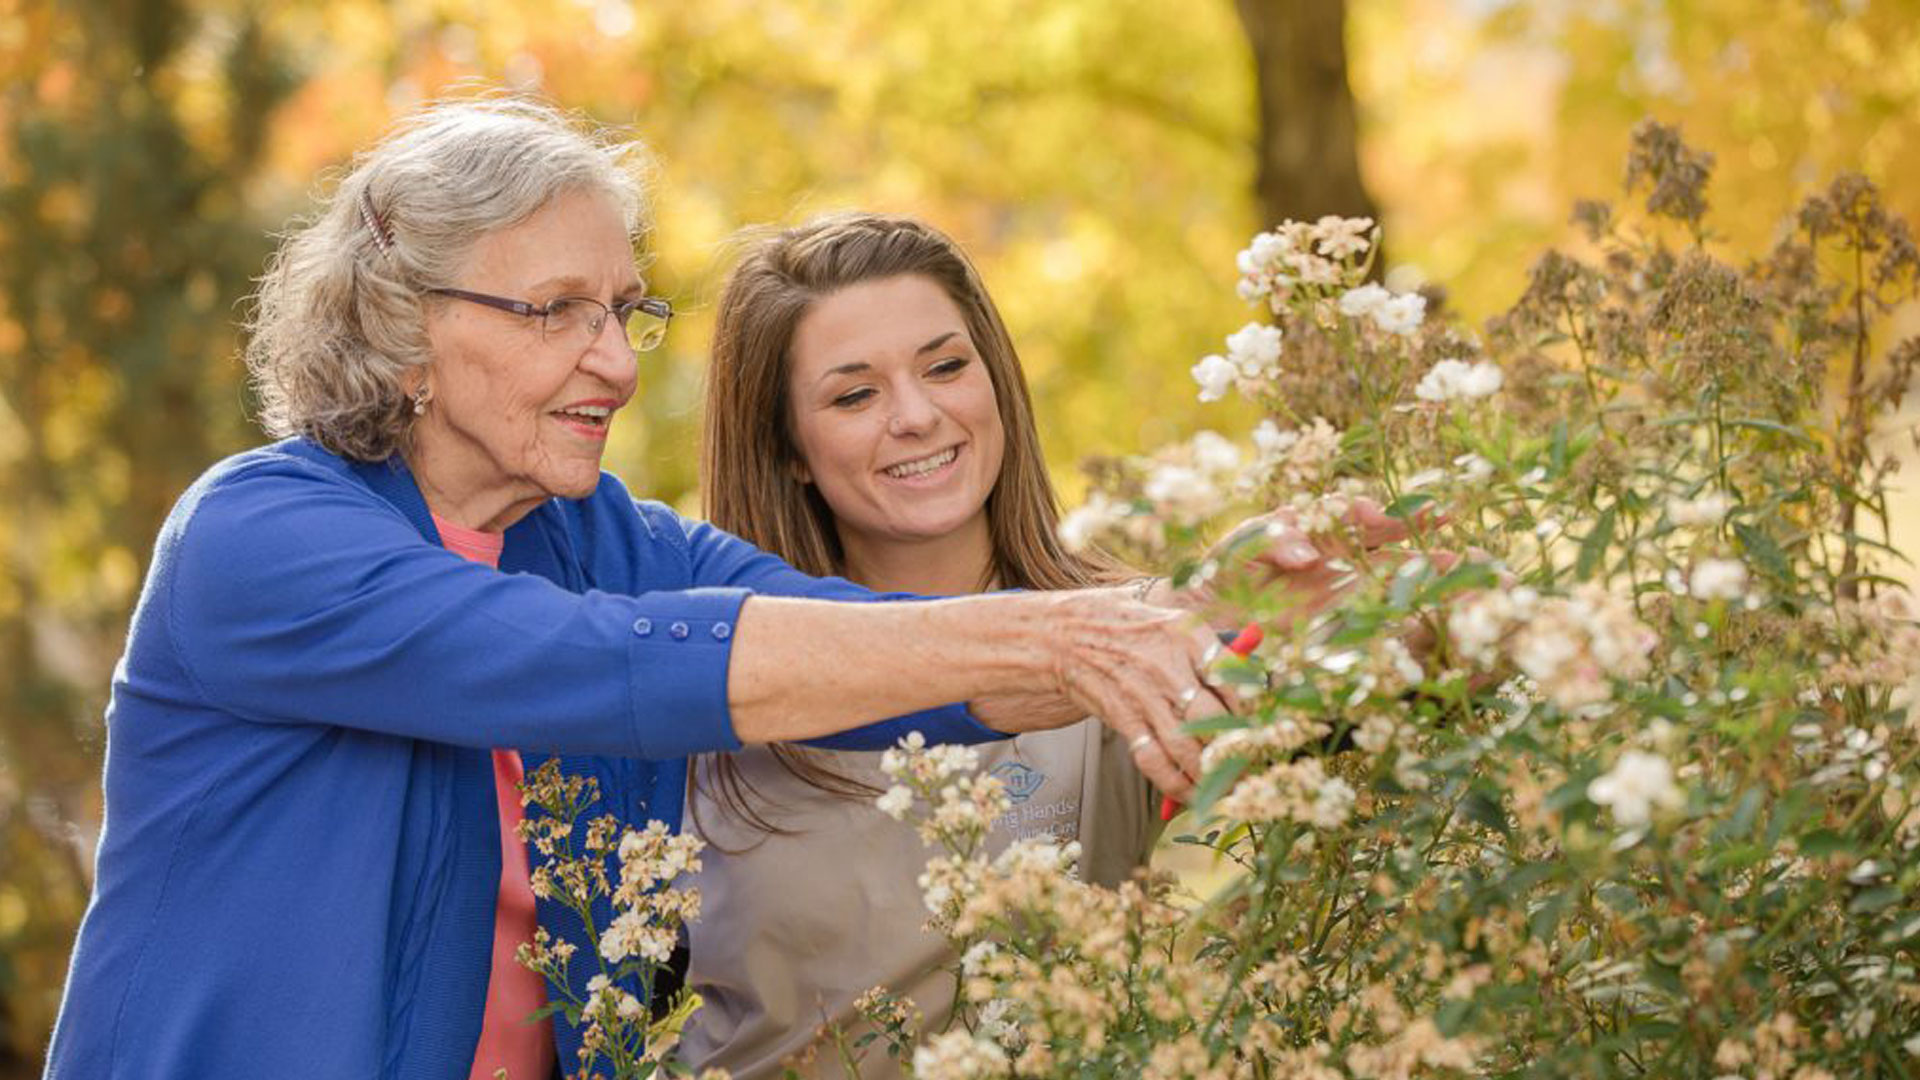 An elderly woman and her caregiver working together in a garden, symbolizing fostering independence and autonomy for seniors with the support of caregivers.